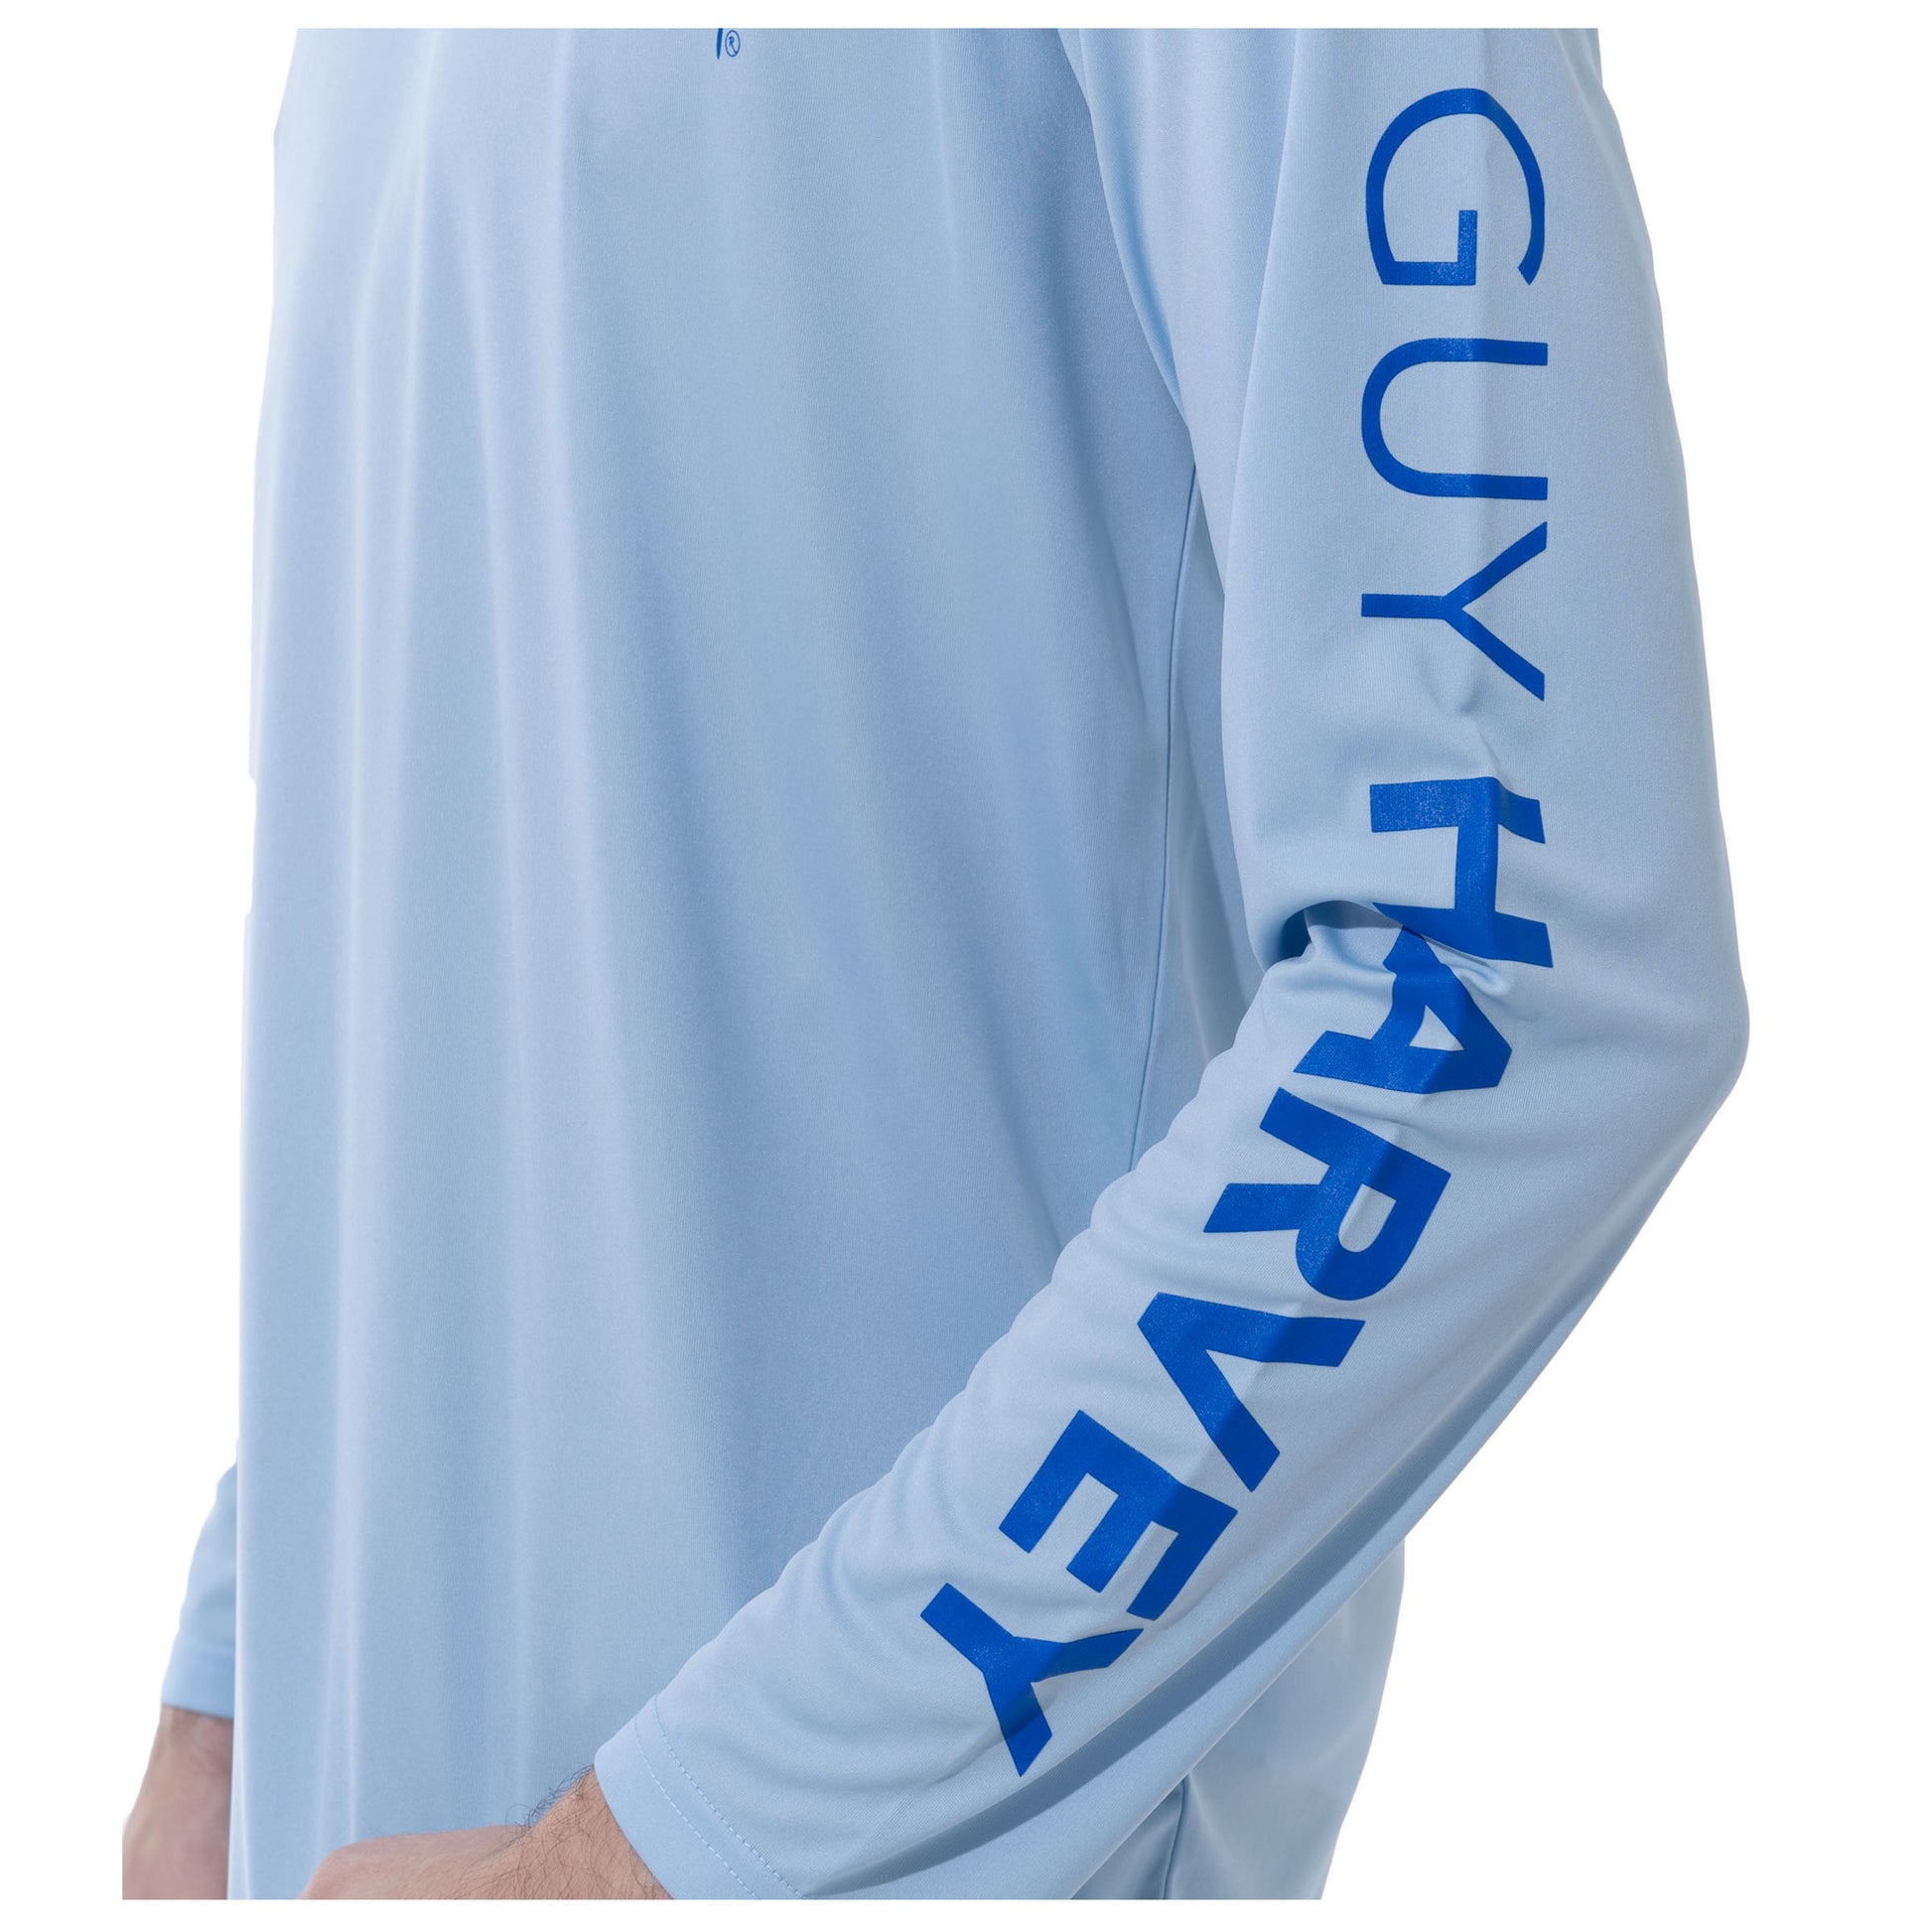 Men Long Sleeve Performance Fishing Sun Protection with UPF 50 Plus. Color Light Blue Sleeve has Guy Harvey text